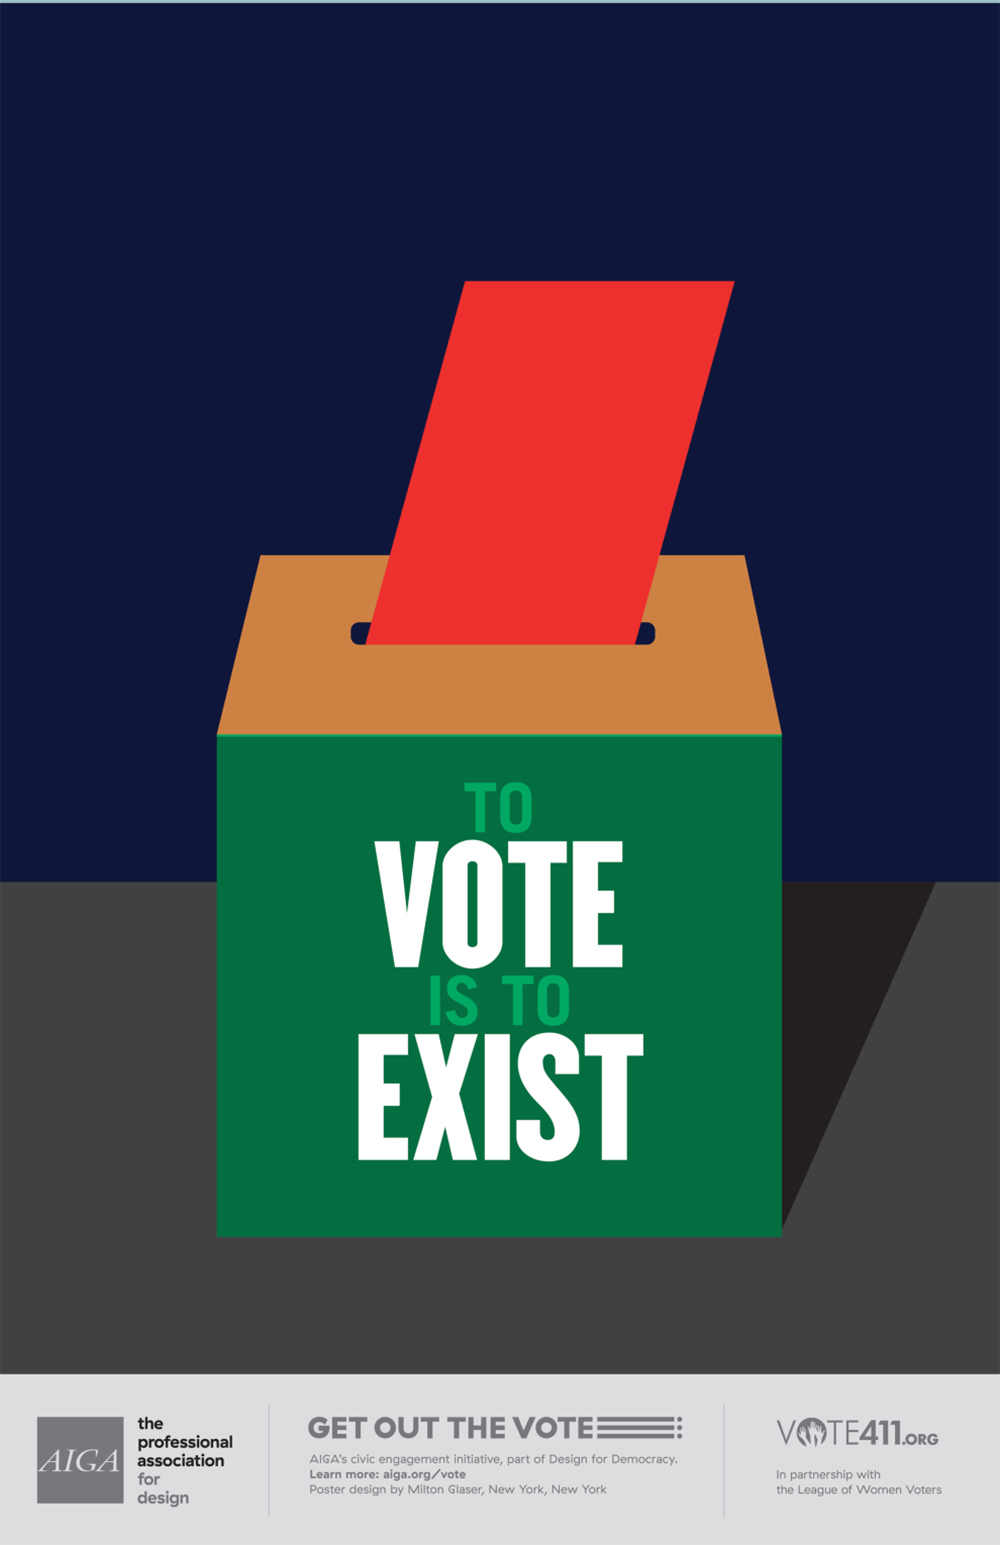 ALABAM-CHANIN-MILTON-GLASER-GET-OUT-THE-VOTE-POSTER-2016